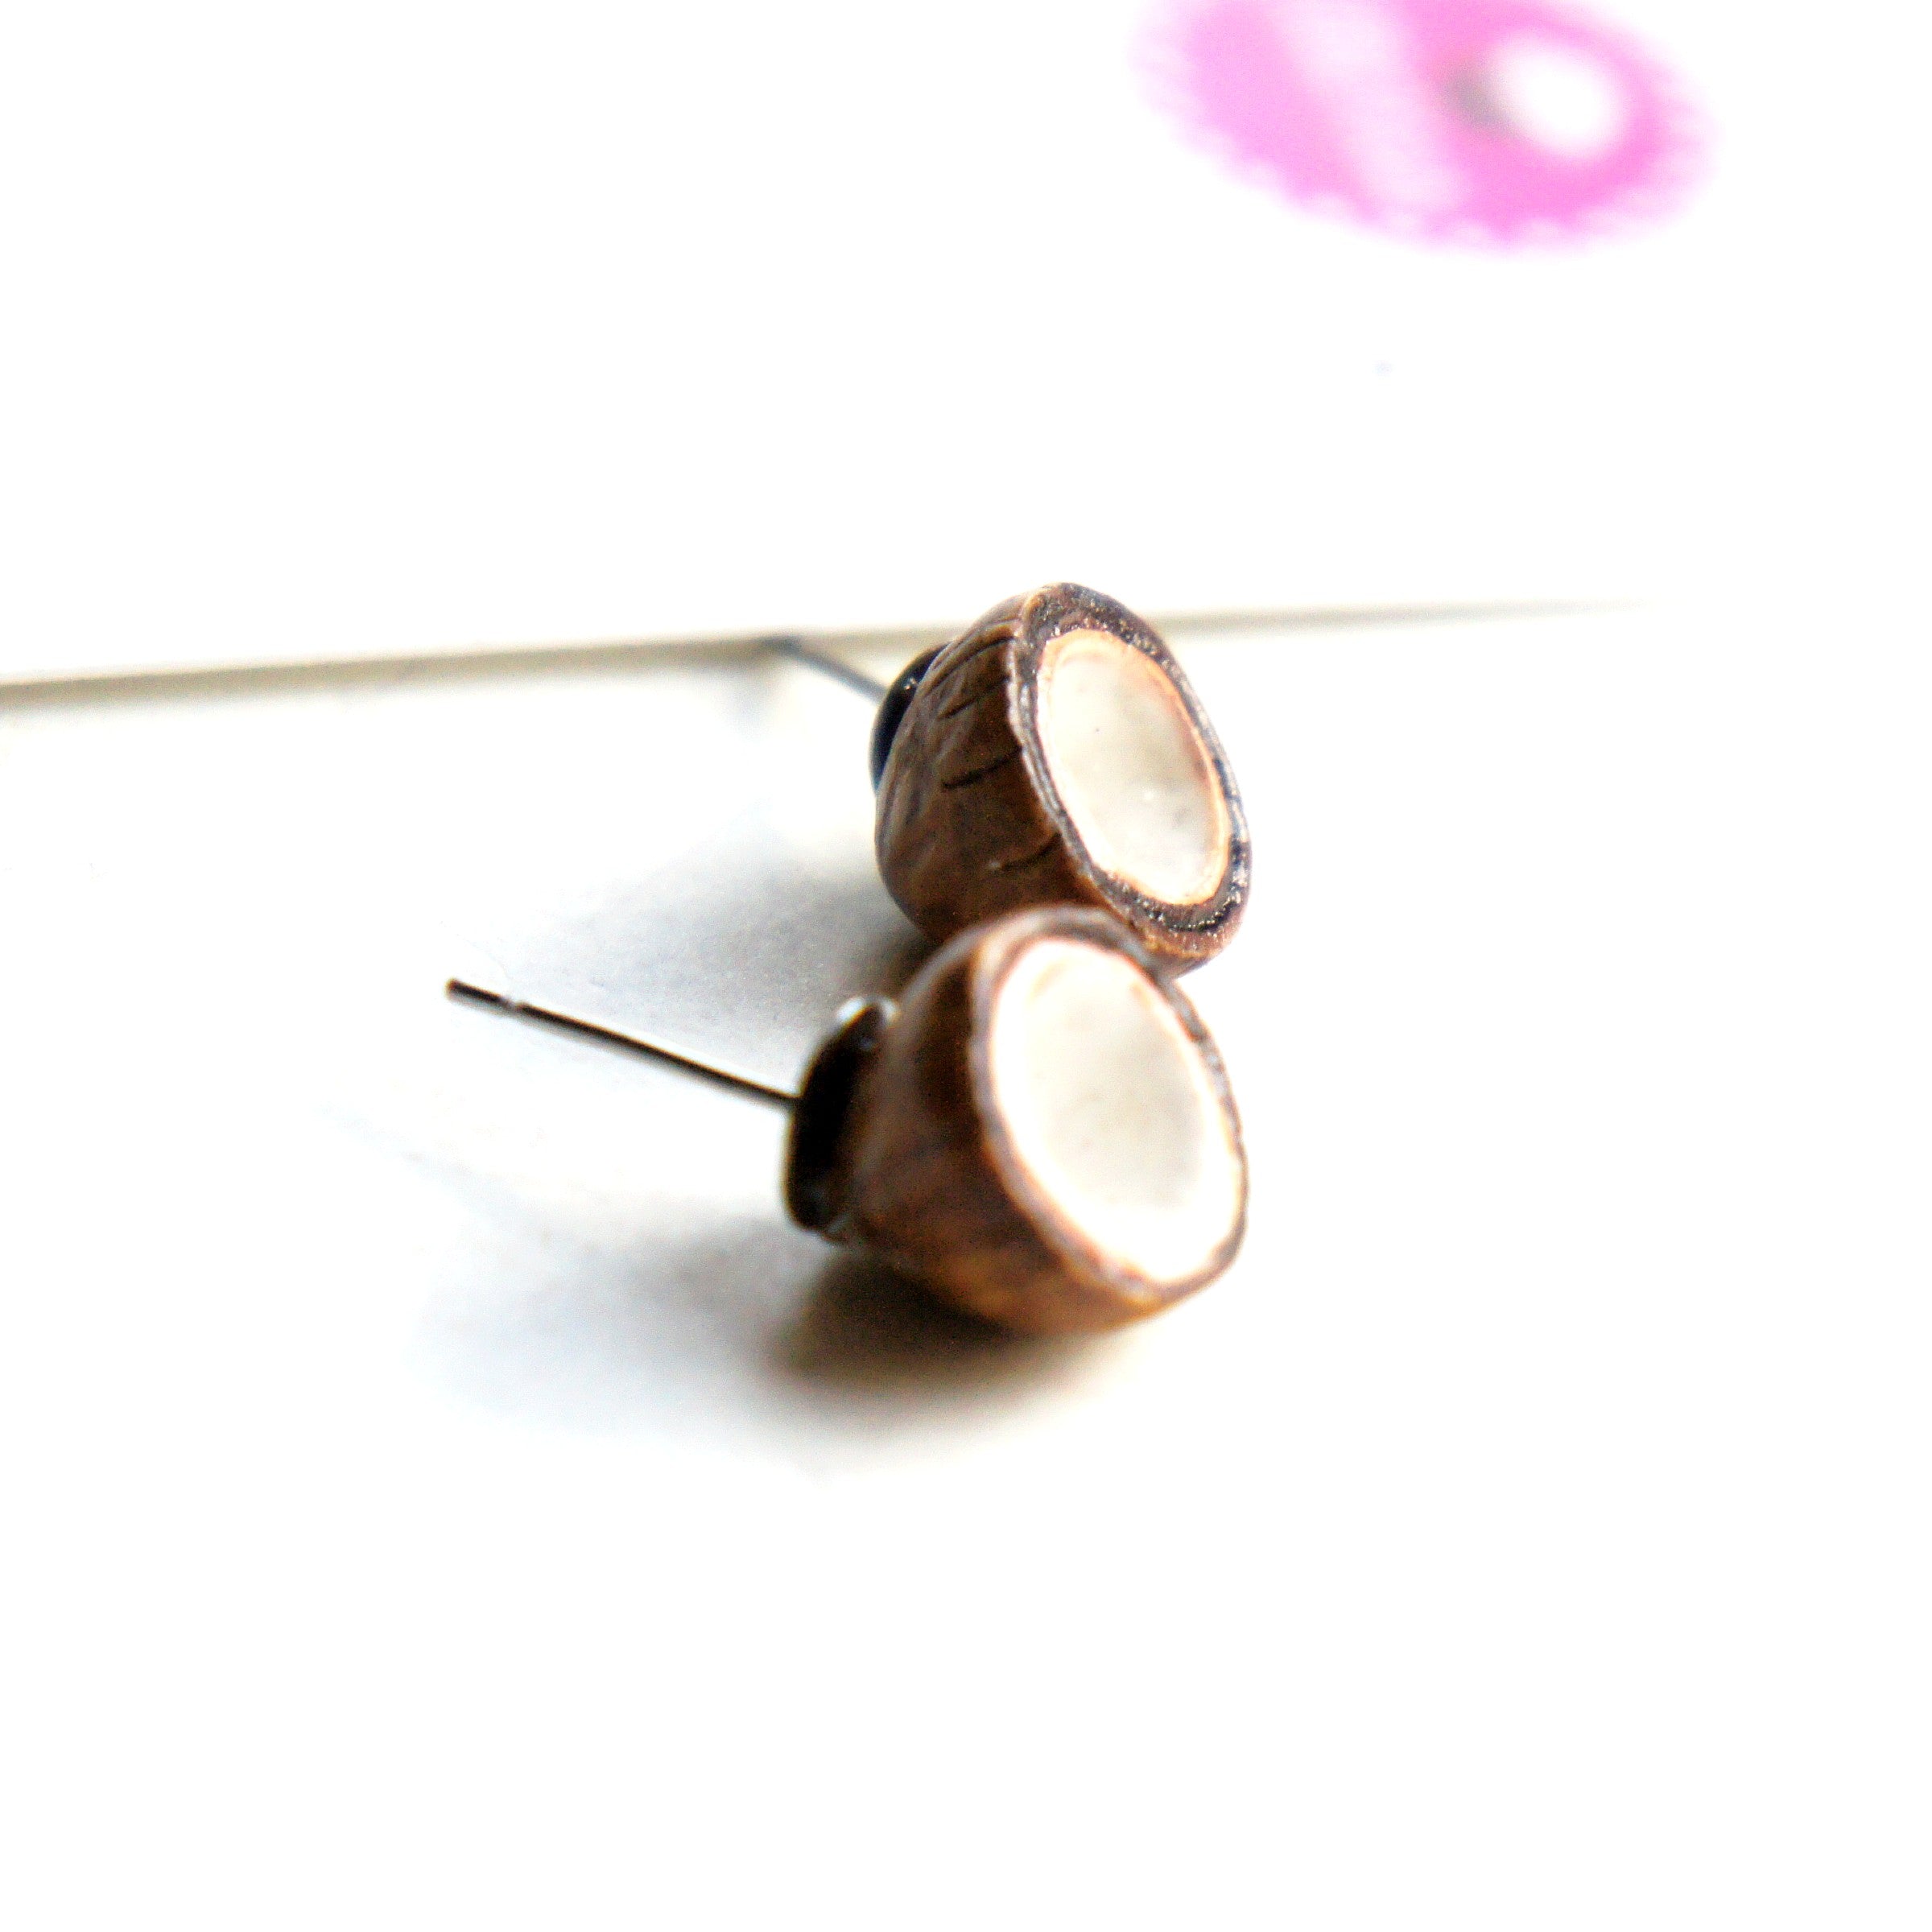 Coconut Stud Earrings - Jillicious charms and accessories